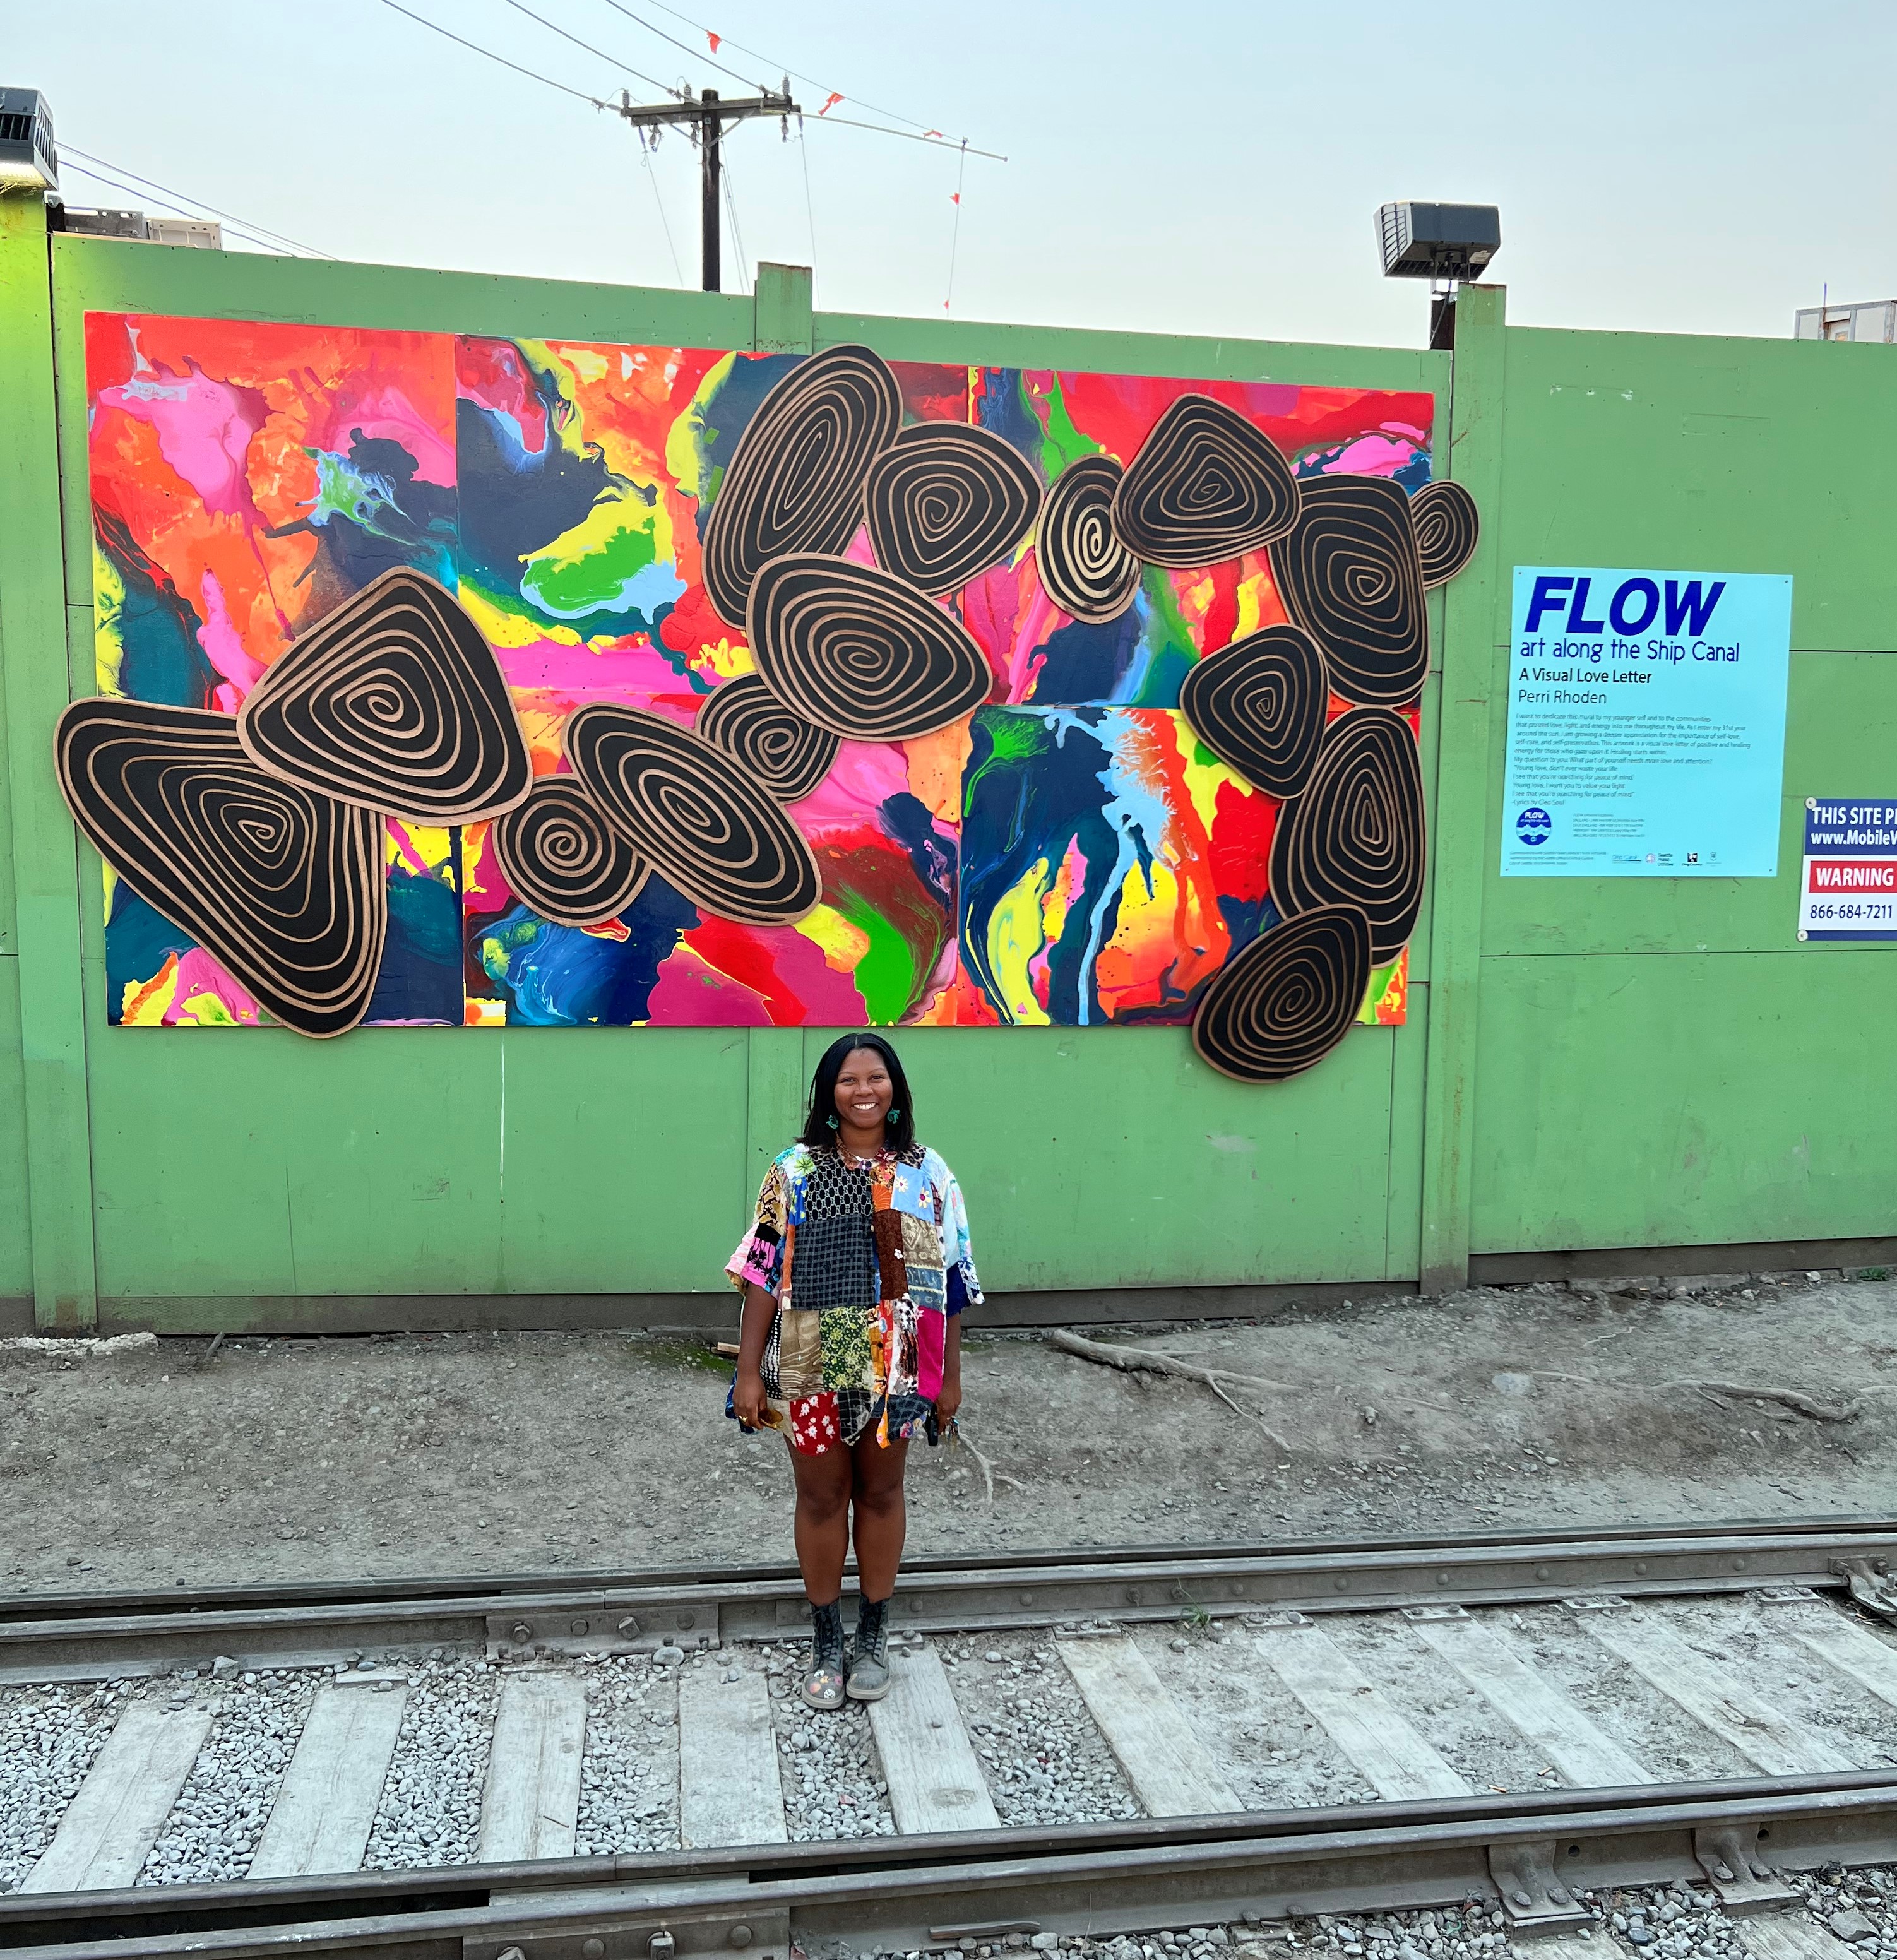 Artist, Perri Rhoden, stands in front of their mural. The Mural is brightly multicolored with black and gold spirals throughout the piece. 